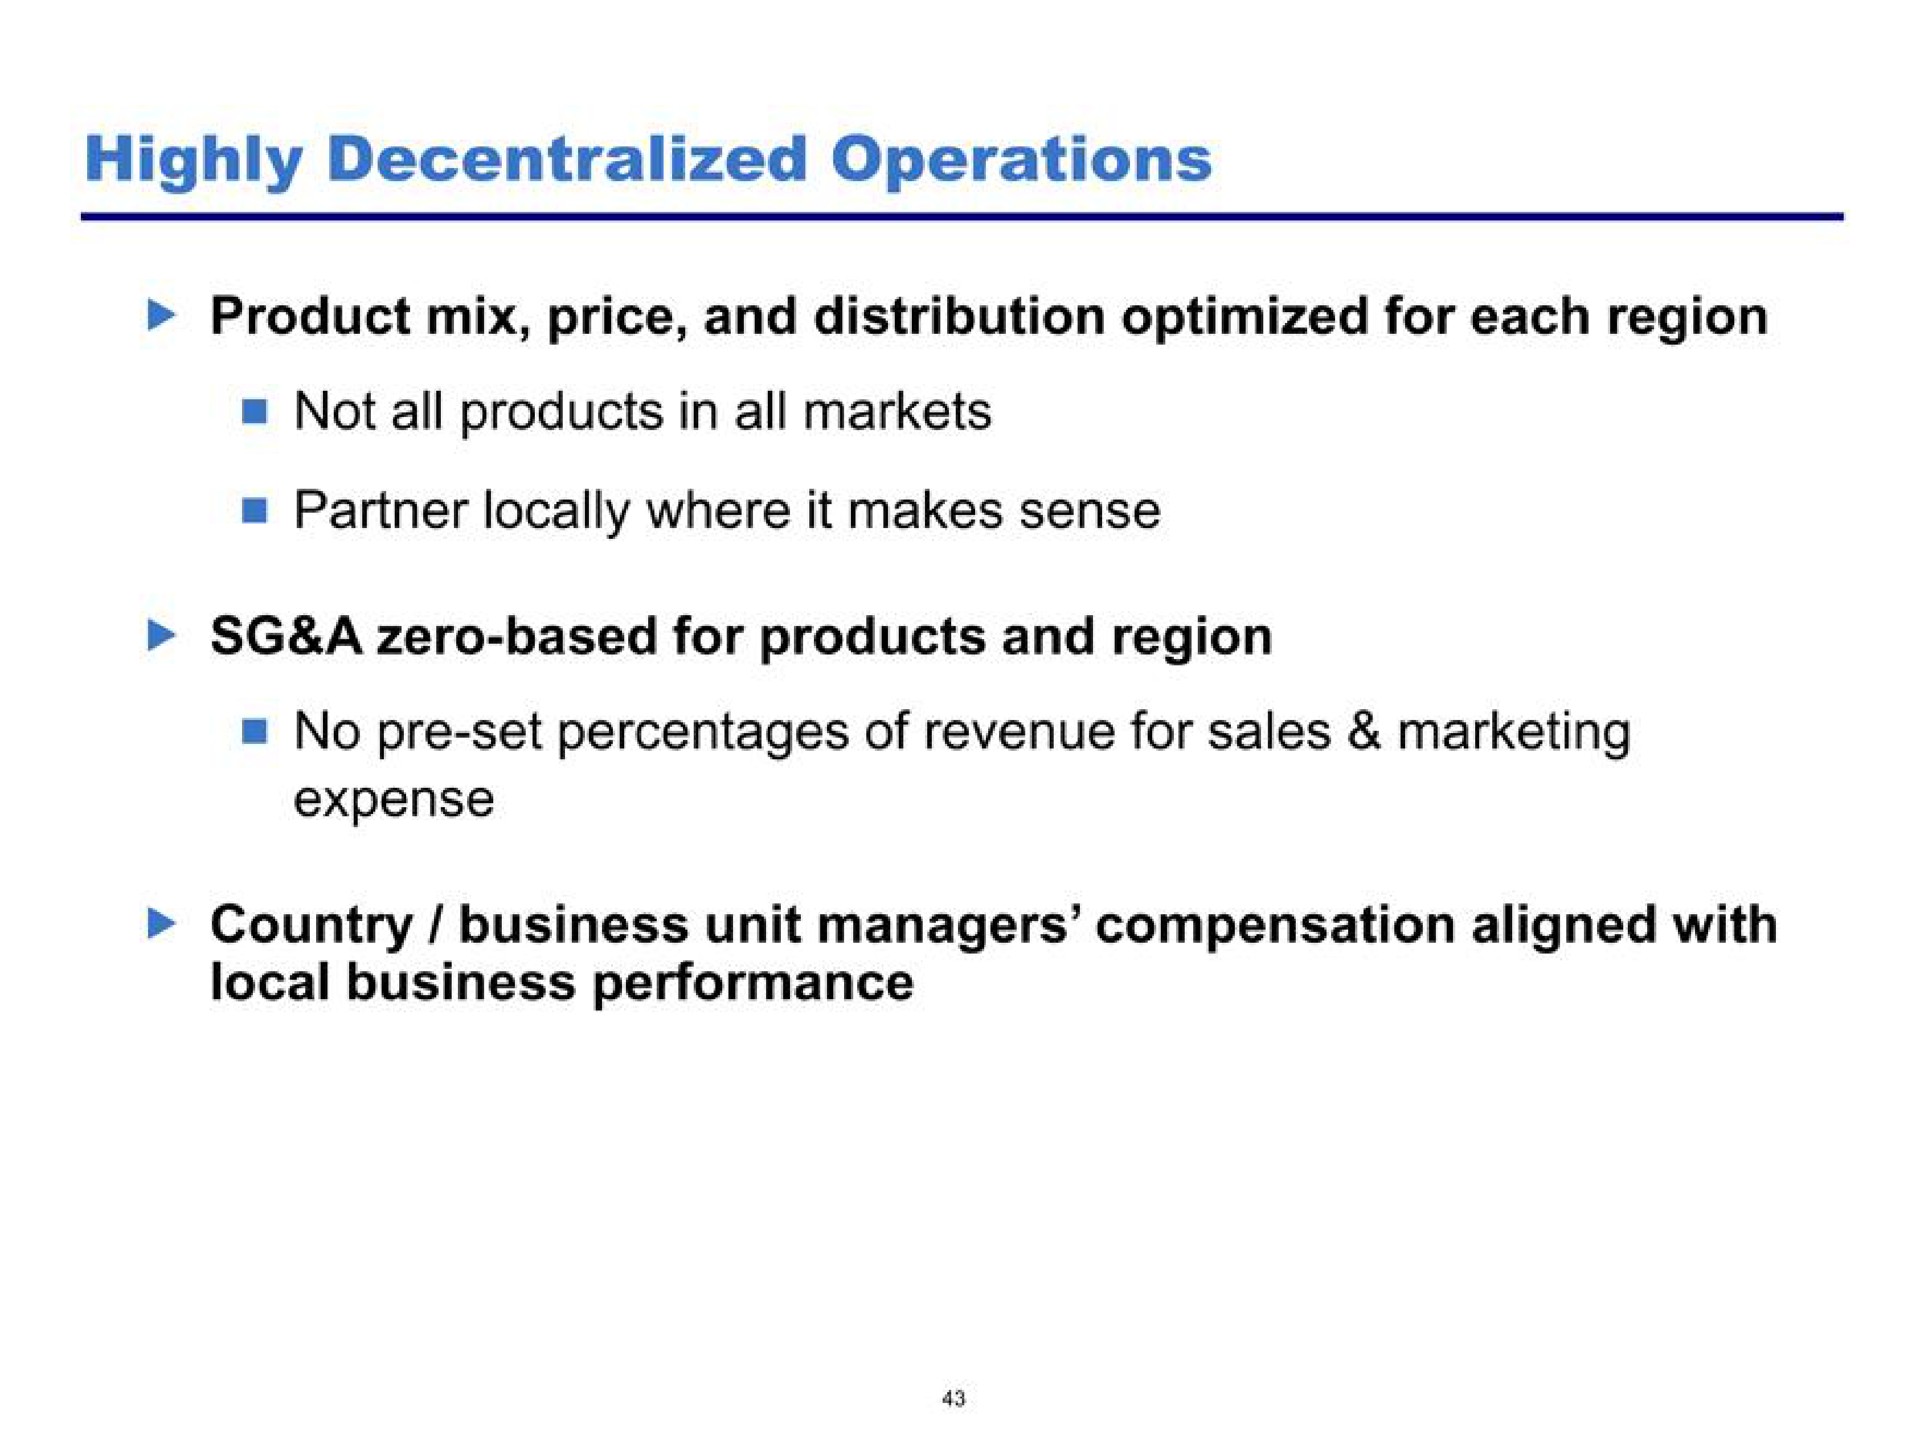 highly decentralized operations | Pershing Square